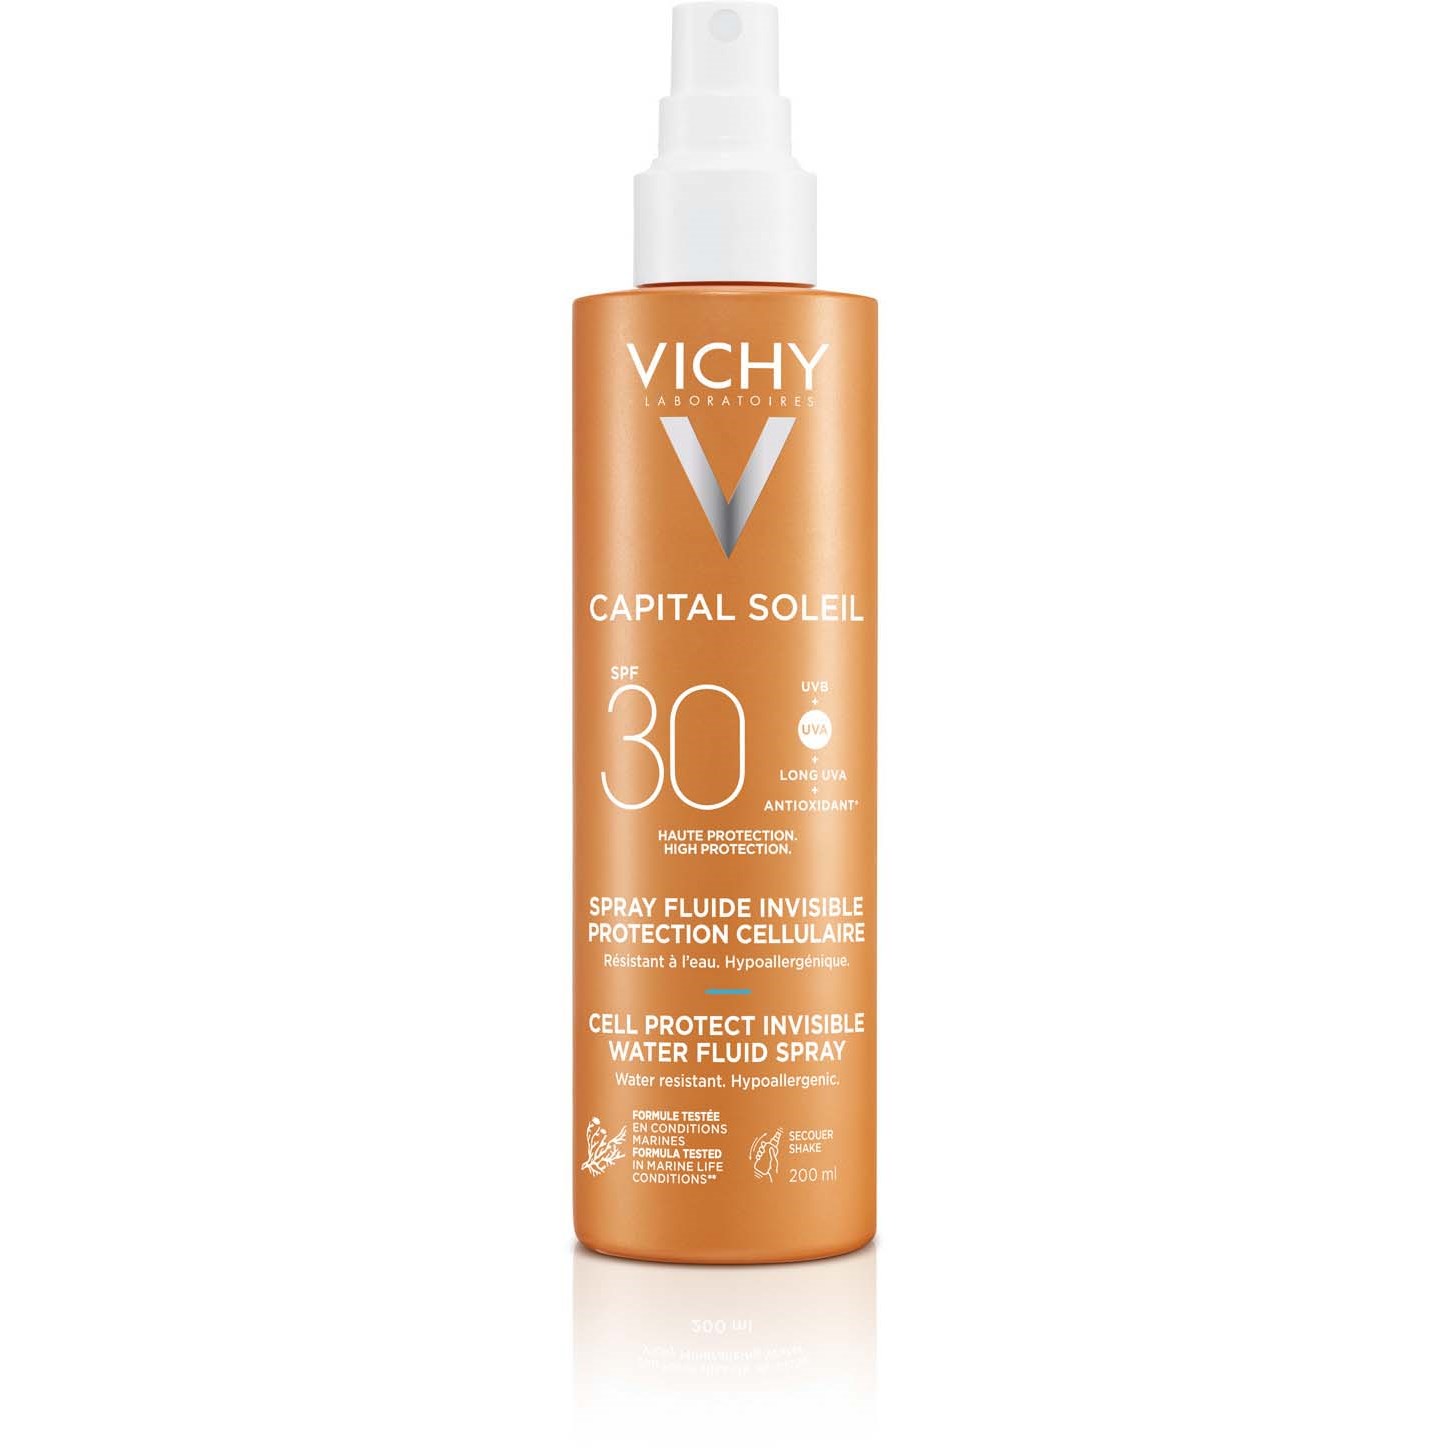 Läs mer om VICHY Capital Soleil Cell Protect Invisible Water Fluid Spray SPF30 20